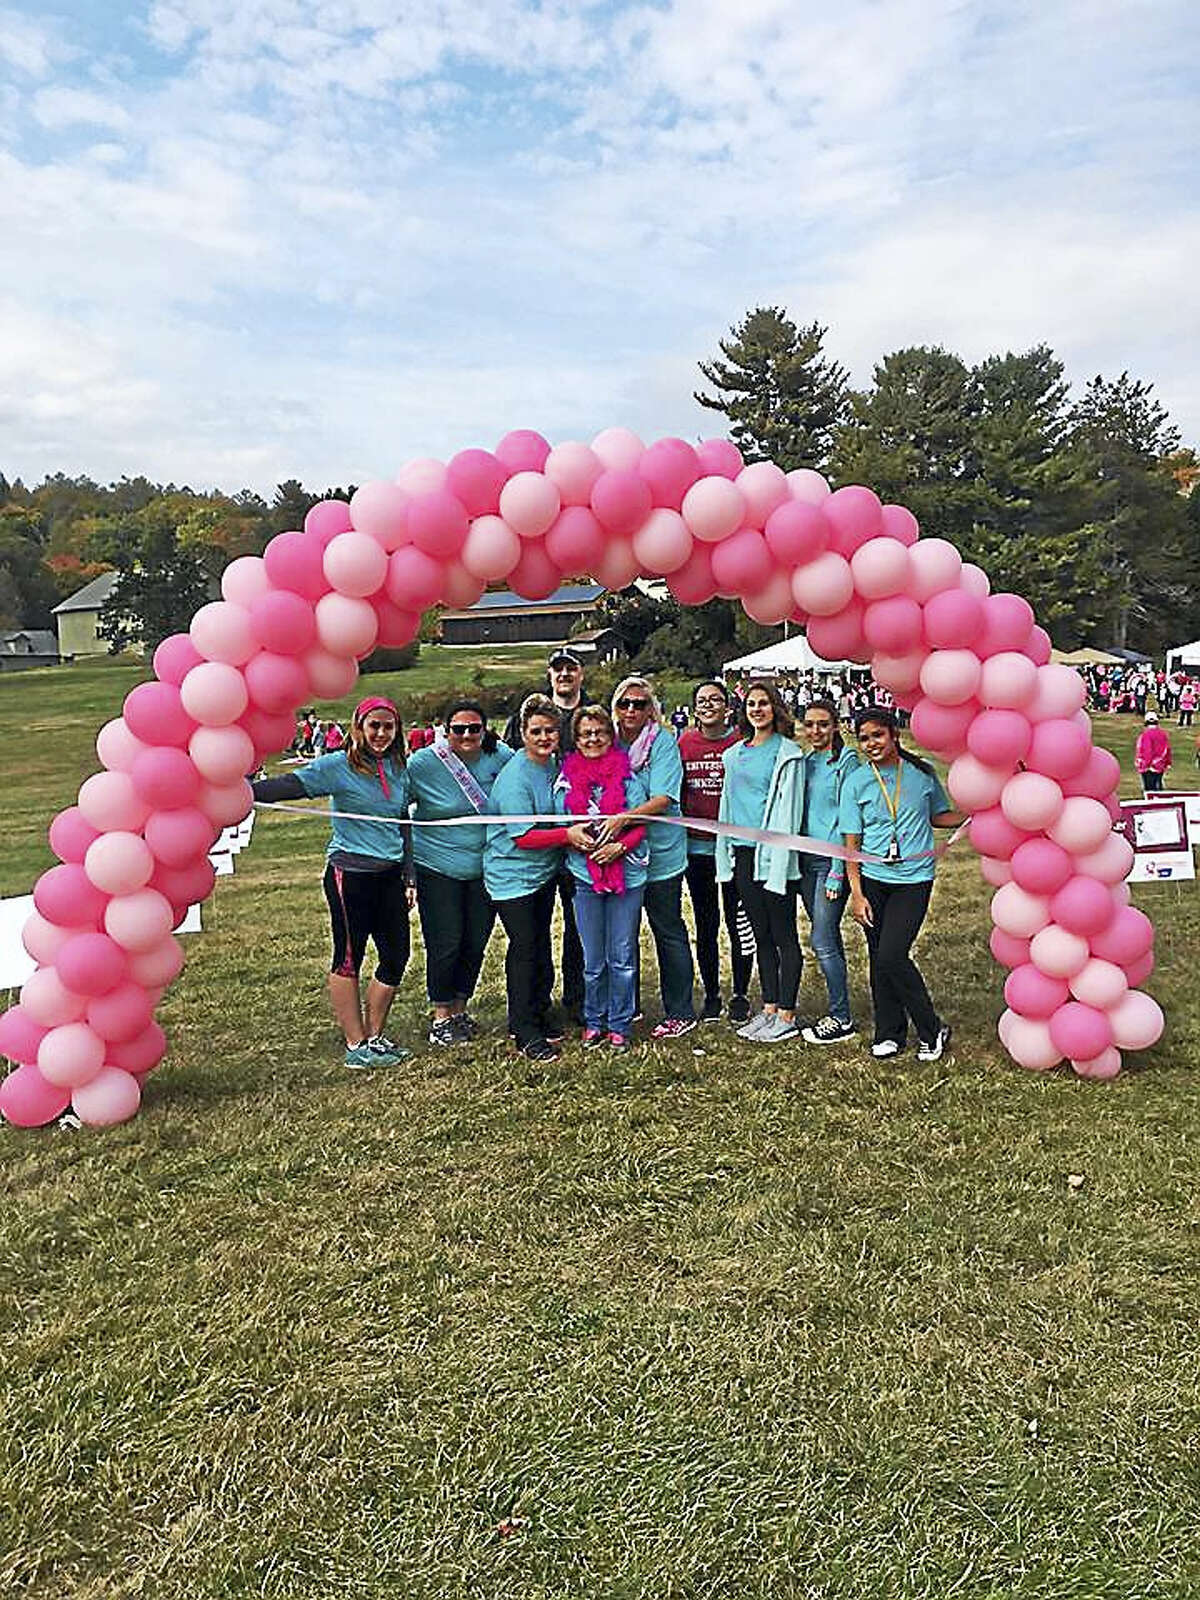 Contributed photo A team gathers for a photo at the Making Strides Against Breast Cancer walk, held Oct. 16 in Litchfield.